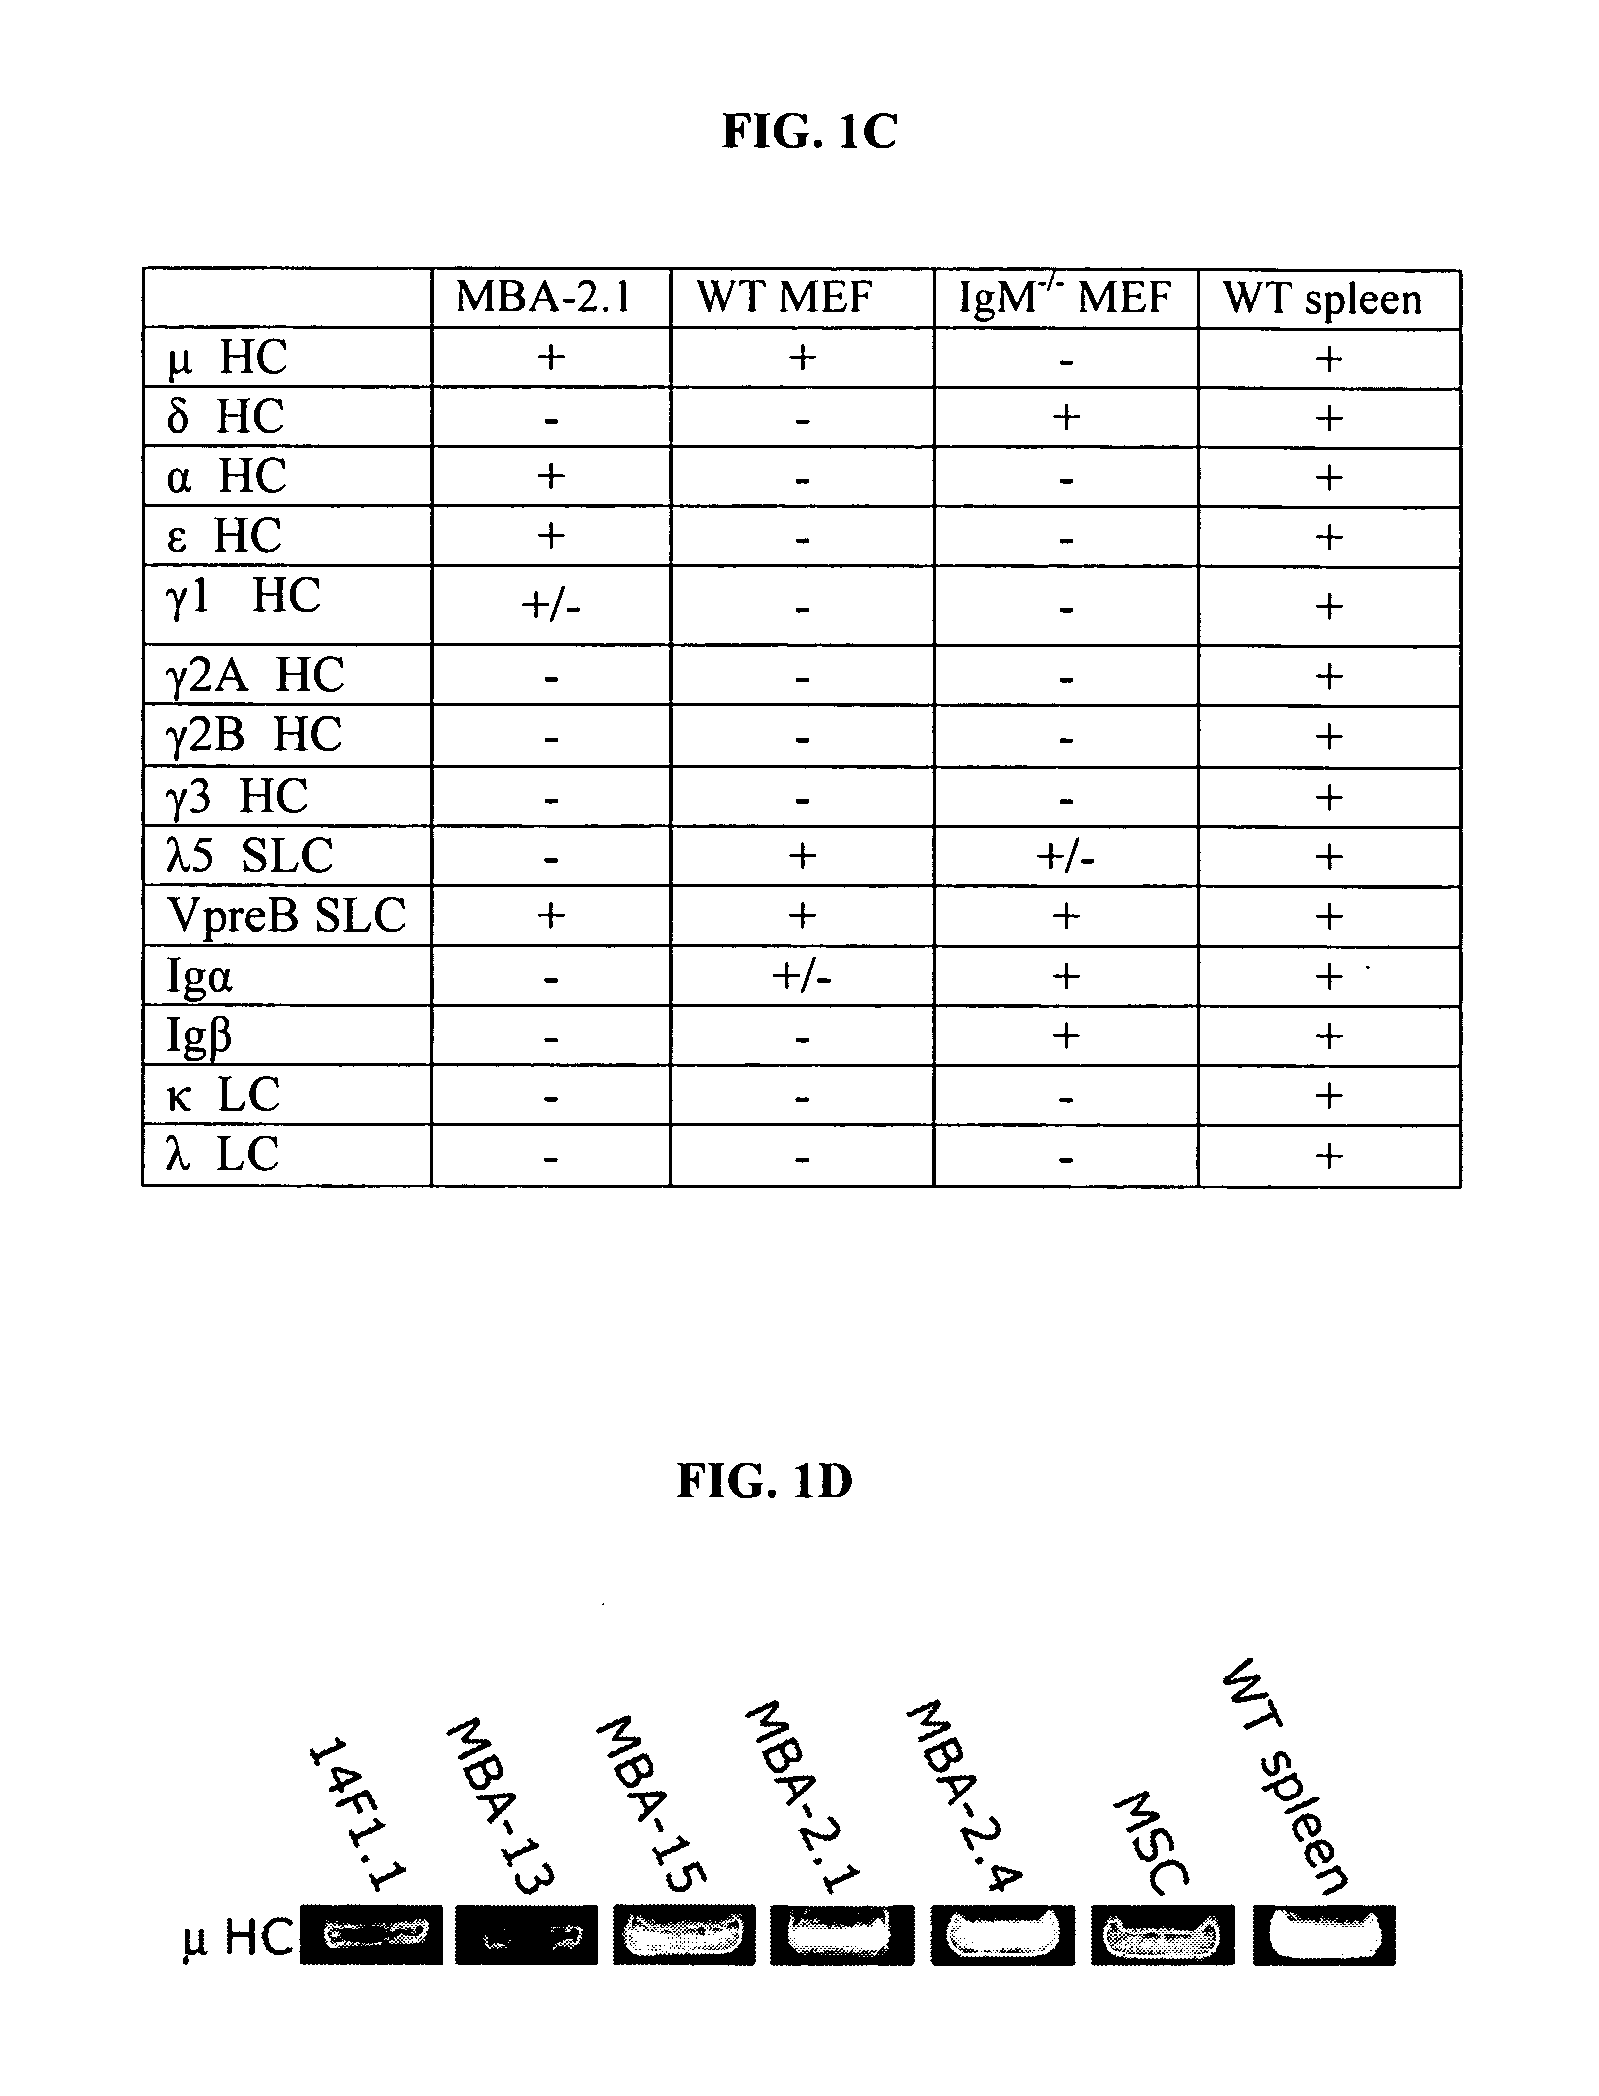 Immunoglobulin heavy chain variants expressed in mesenchymal cells and therapeutic uses thereof